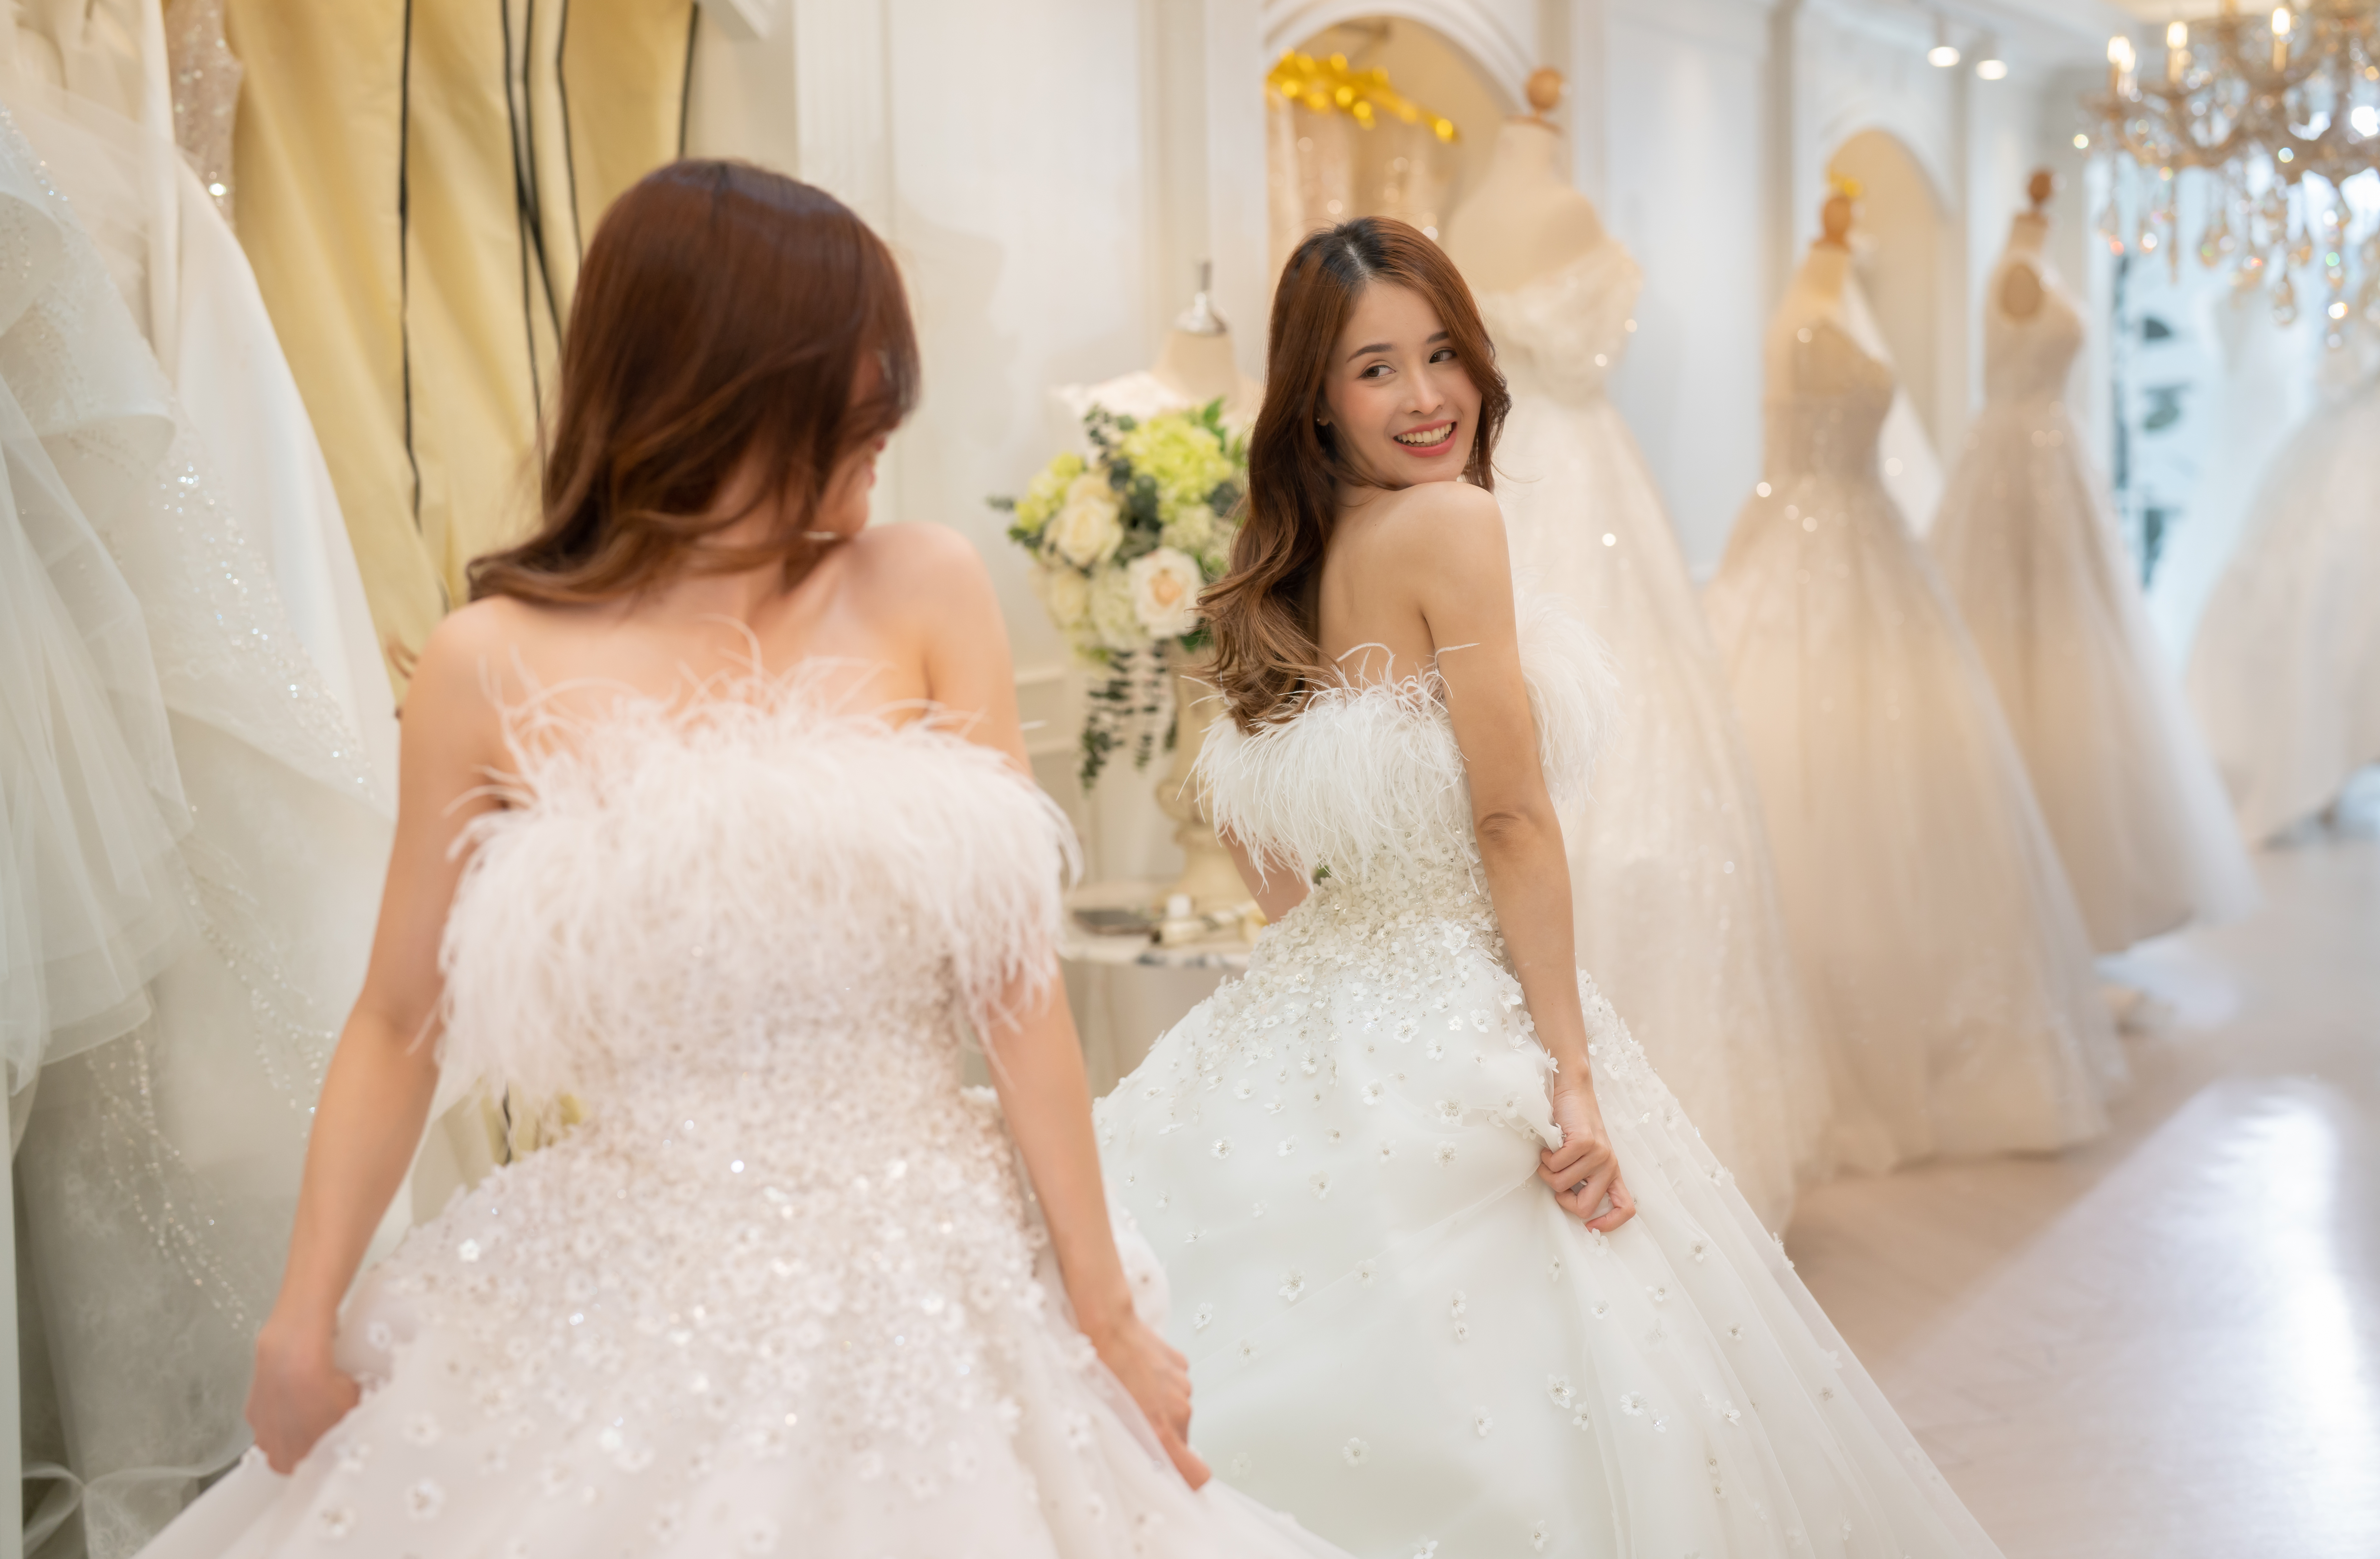 The tailor designs the wedding dress for the bride | Source: Getty Images